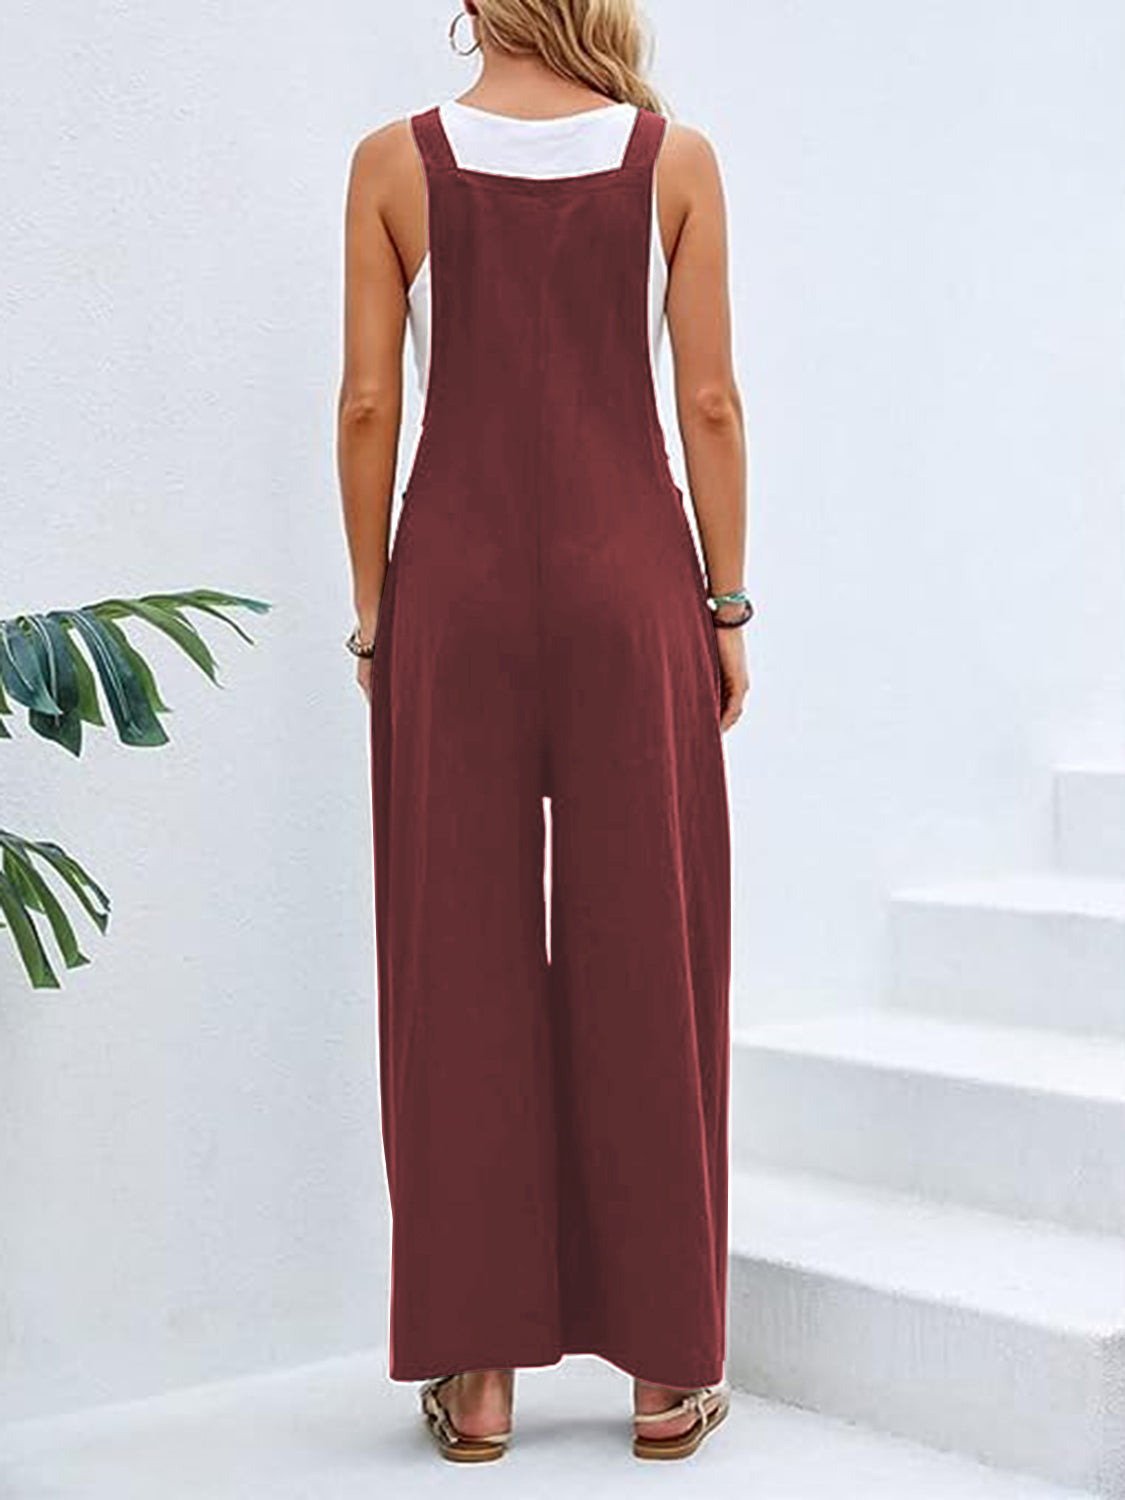 Wide Leg Overalls with Pockets